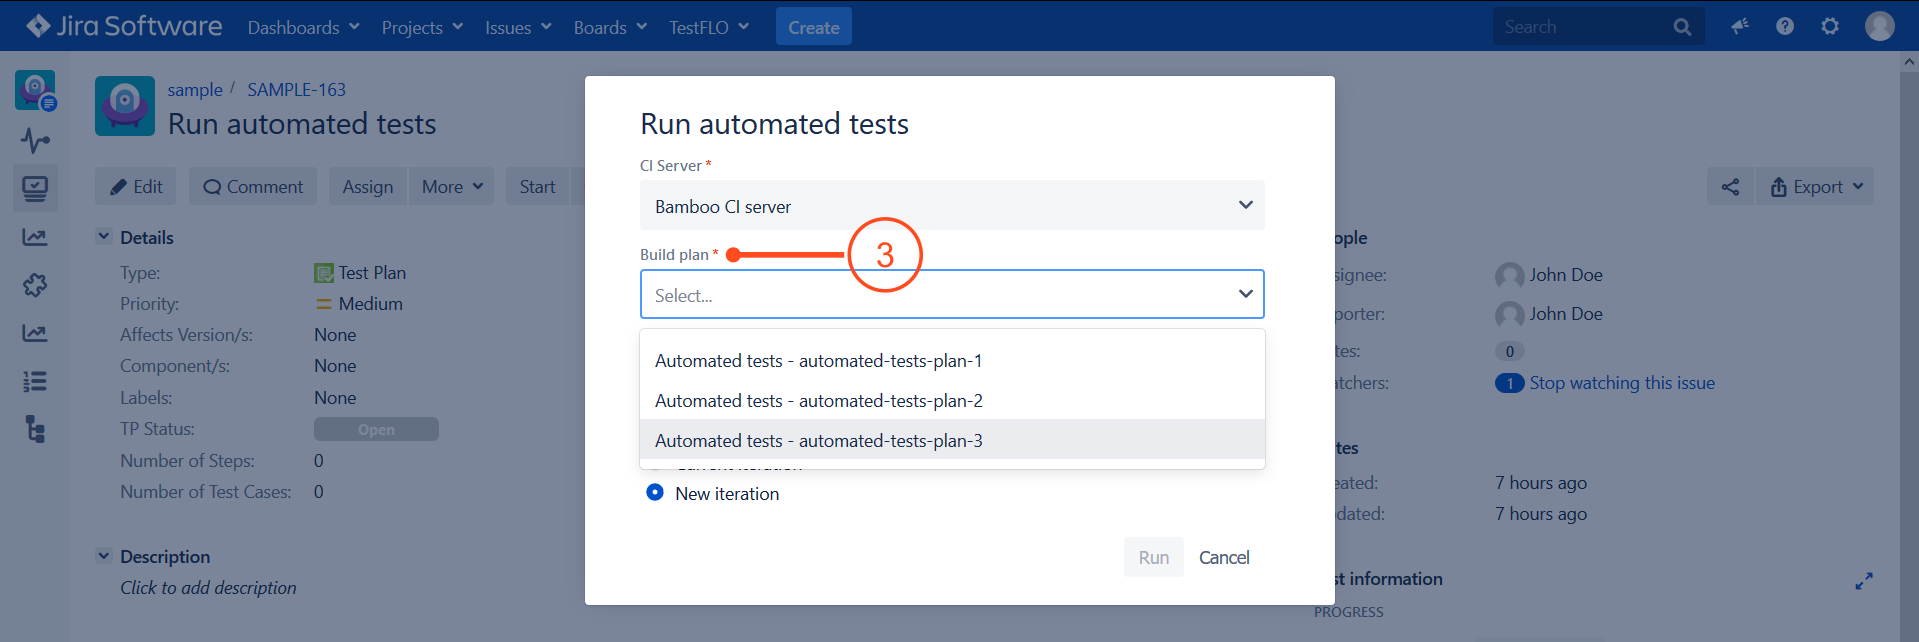 Run automated tests operation in Test Plan in TestFLO - Test Management in Jira